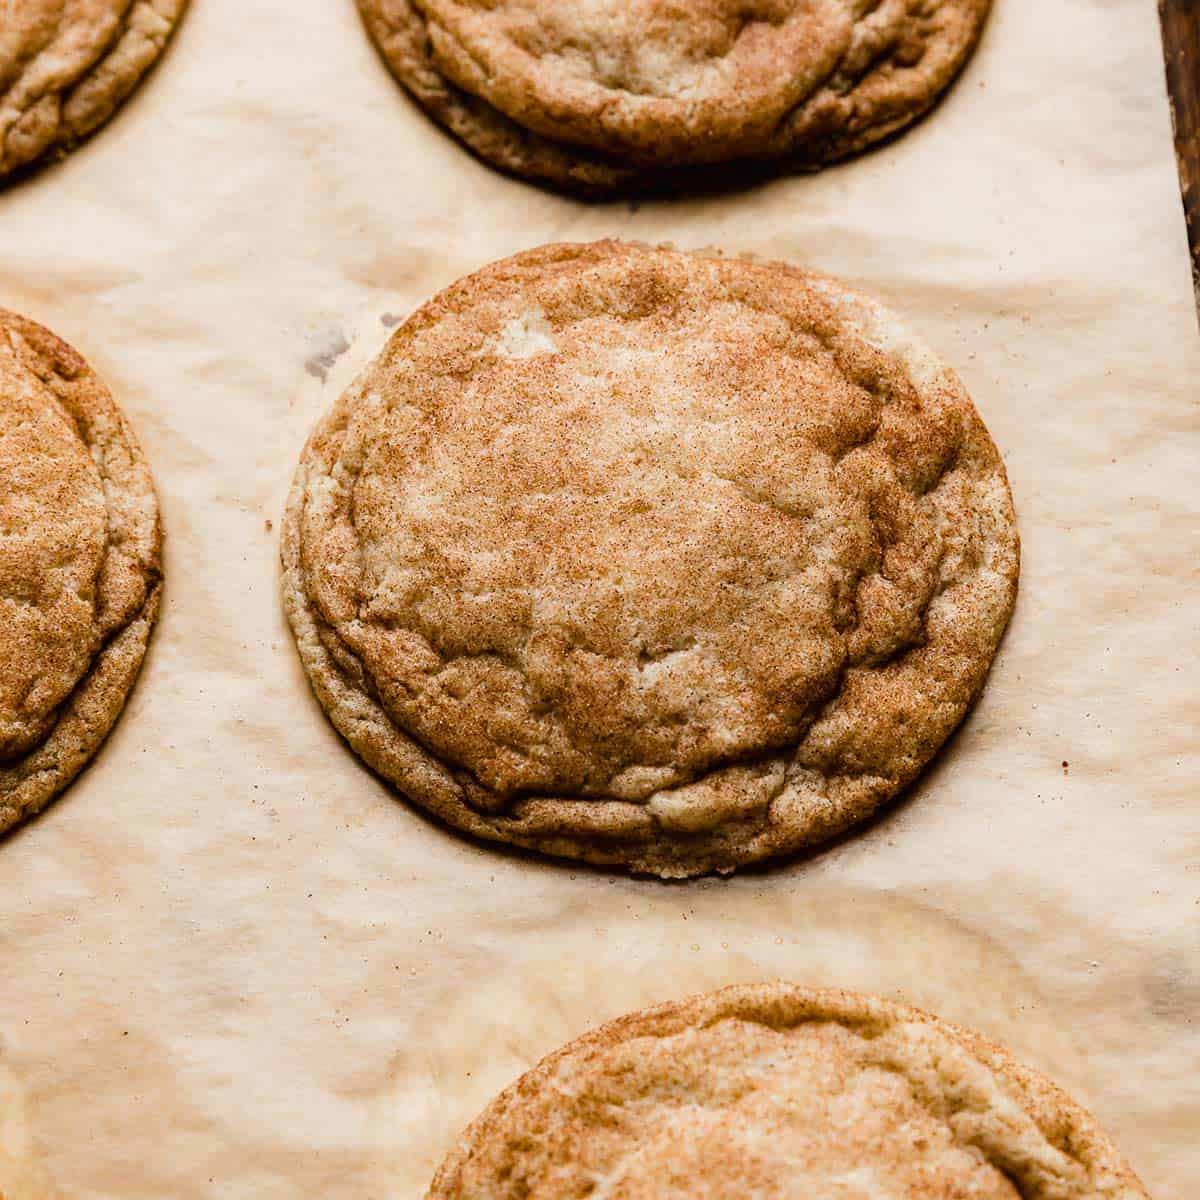 A large snickerdoodle cookie on a tan parchment paper.